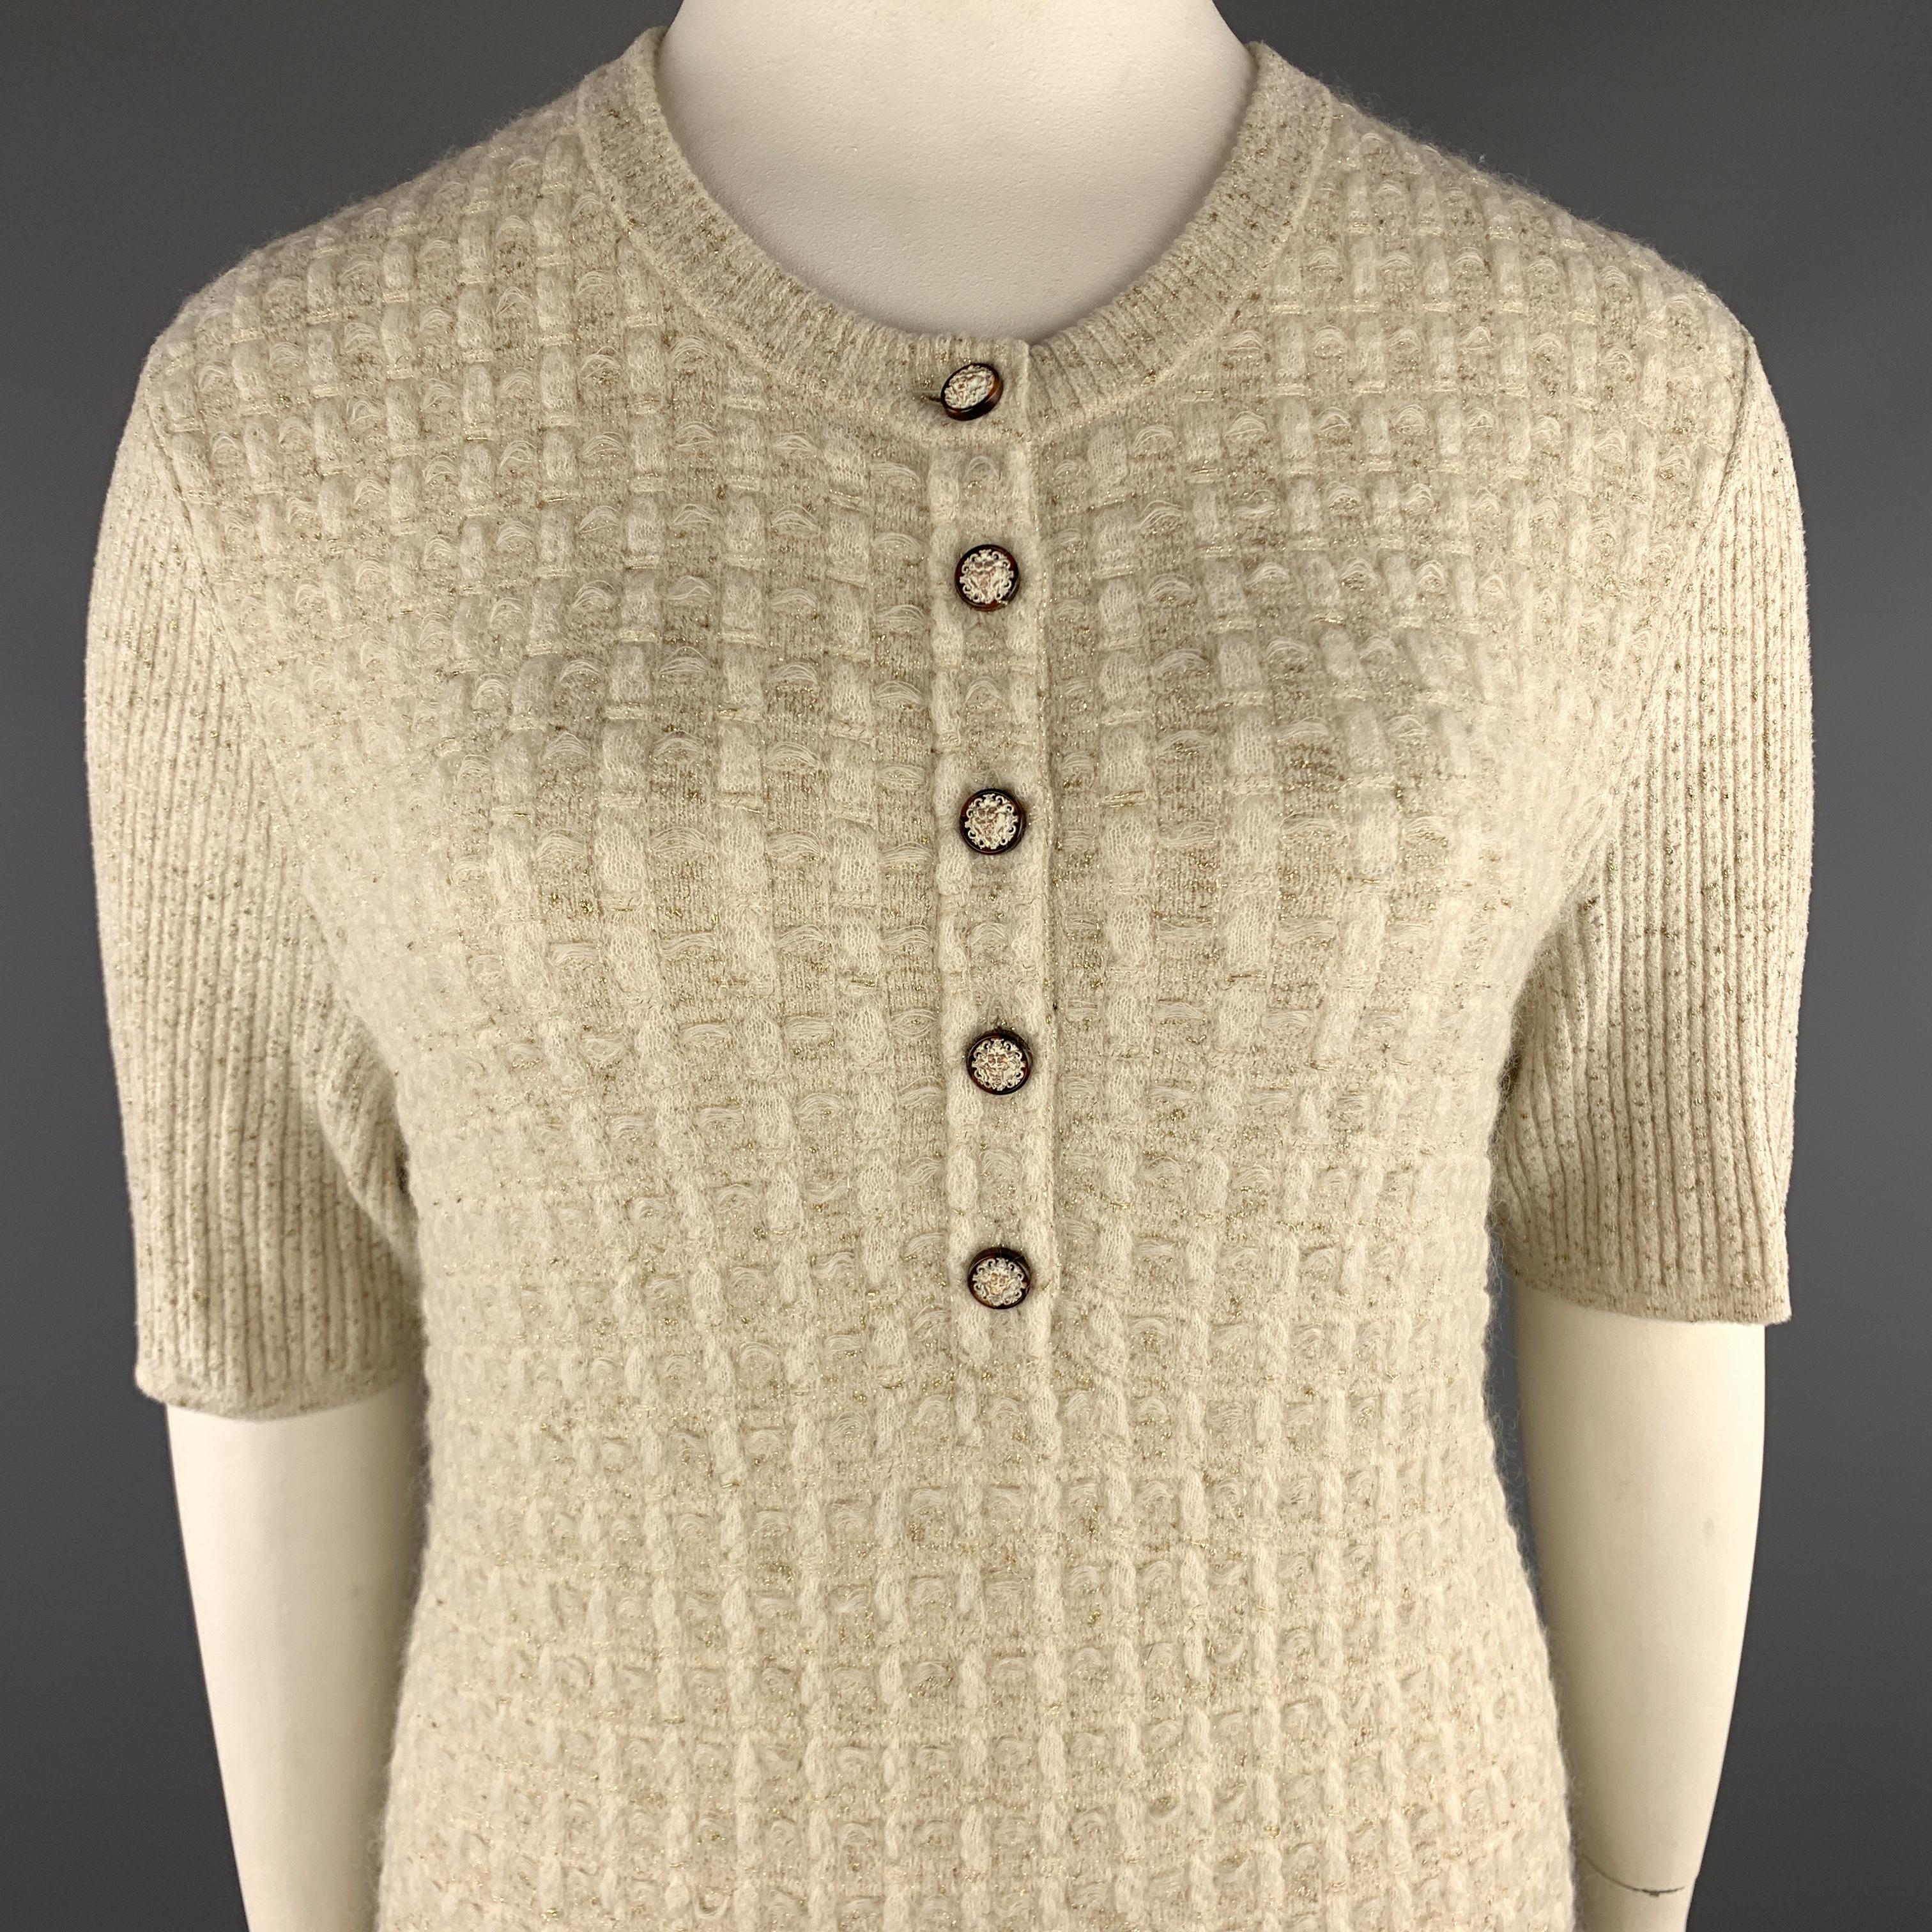 CHANEL sweater dress comes in cream tweed textured knit with metallic gold sparkle texture throughout and features a scoop neck with henley lion head button closure, short ribbed sleeves, and A line silhouette with patch pockets. Made in